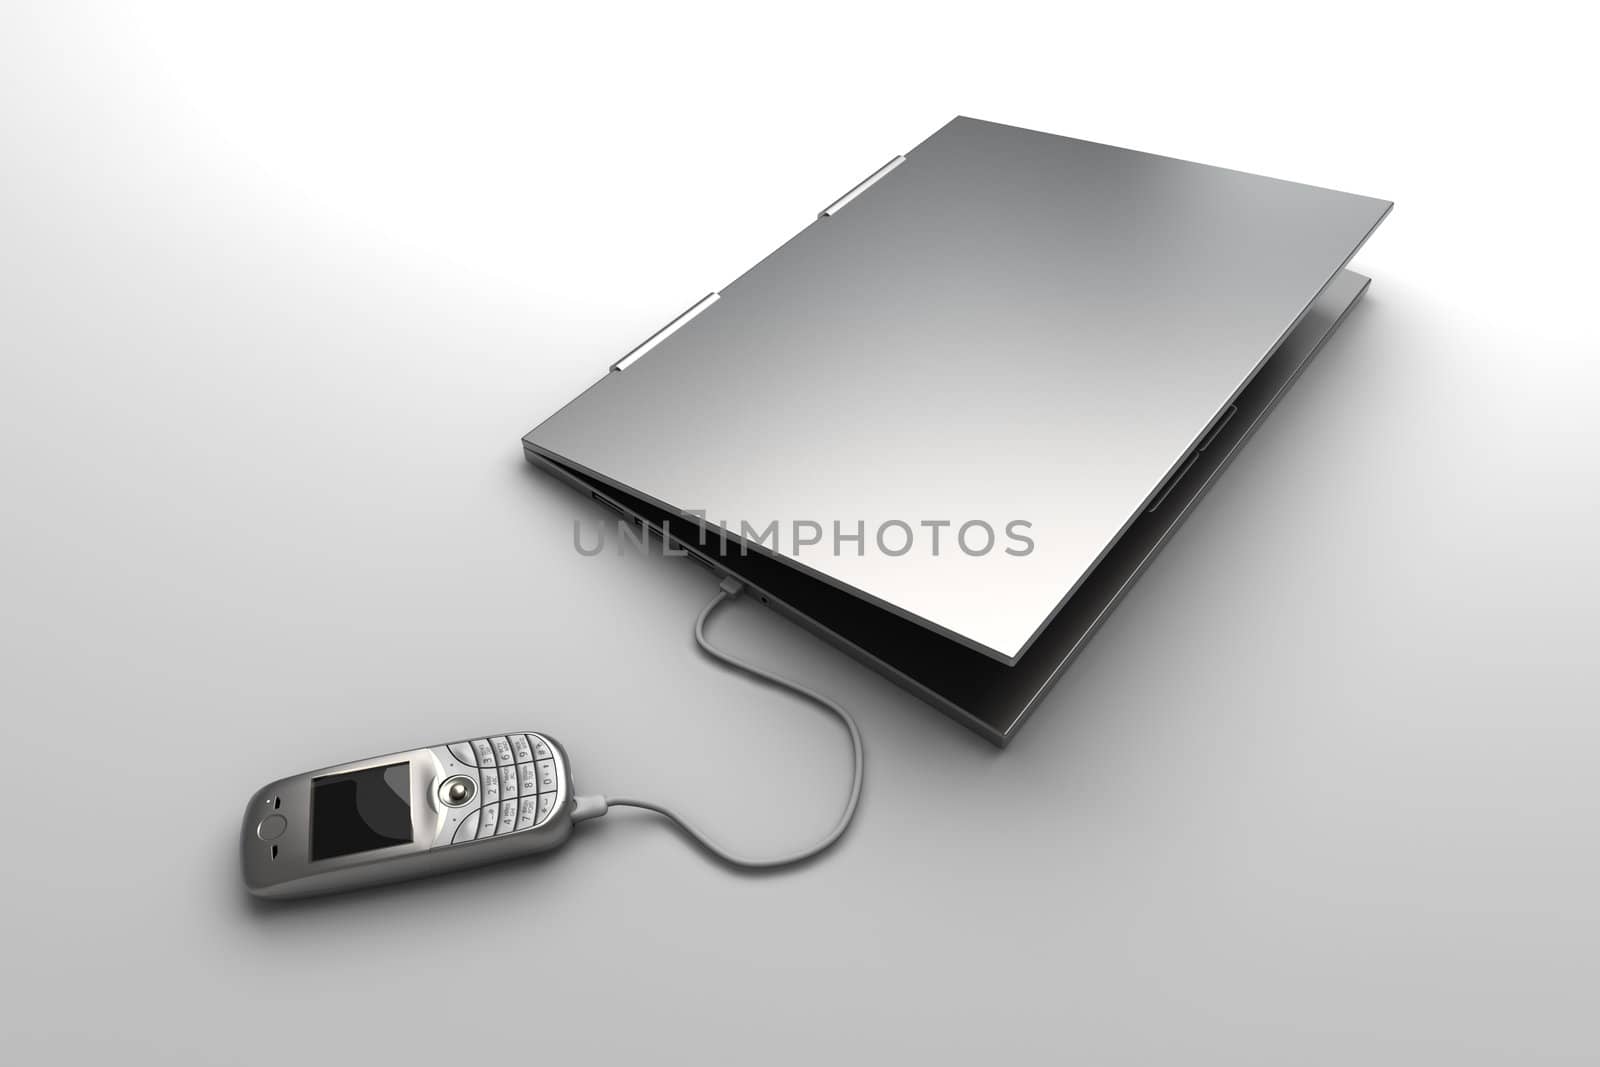 A cell phone and a Laptop. Mobile communication technology. 3D rendered Illustration.